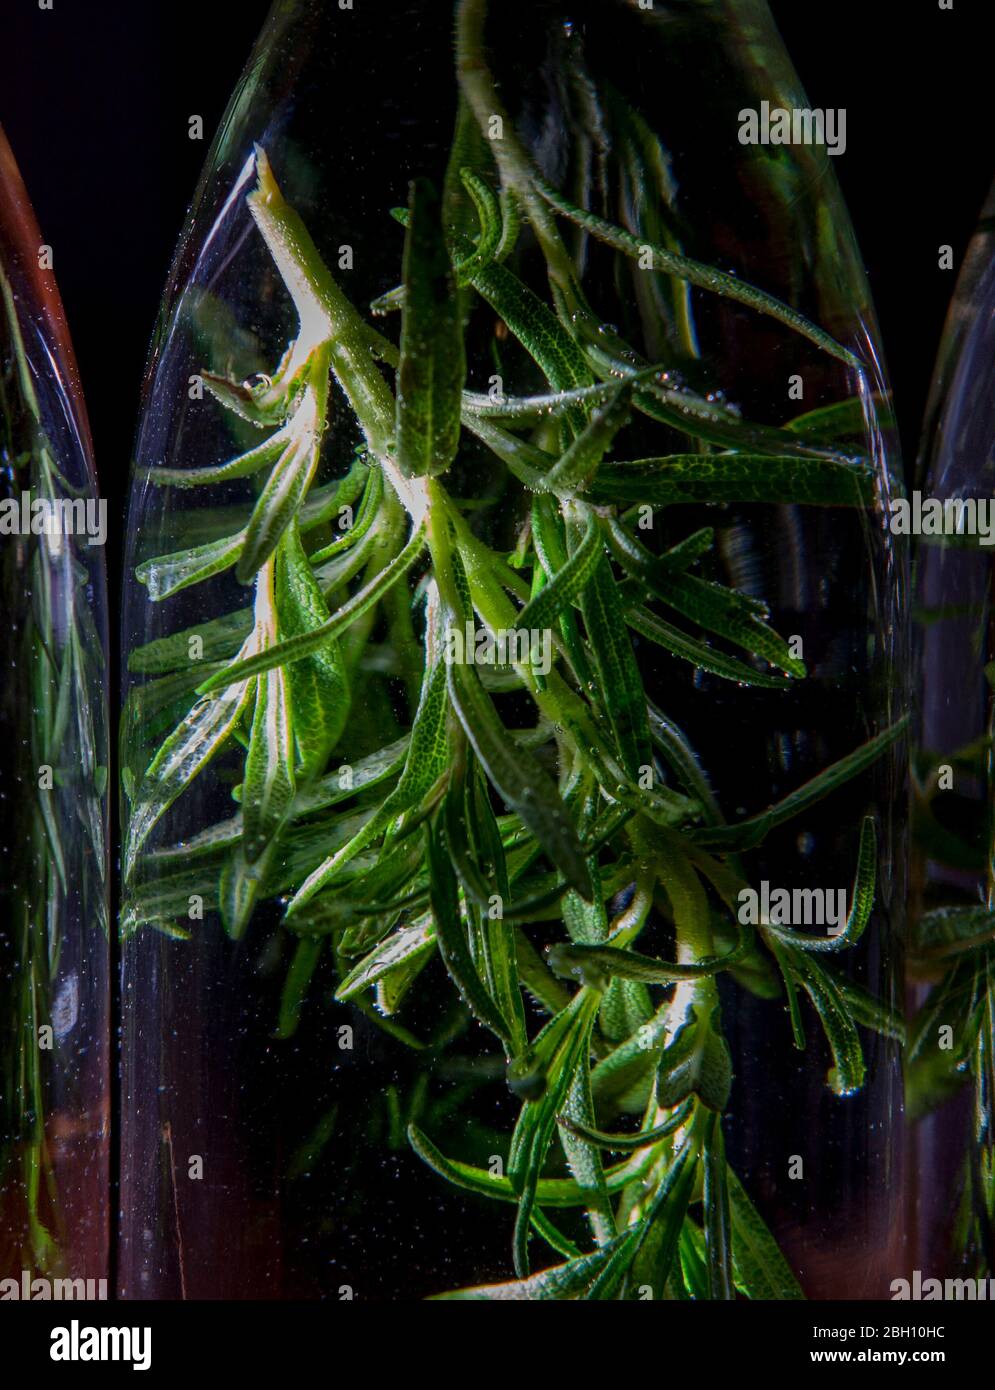 Springs of fresh rosemary sit in vodka to make homemade infused flavored vodka Stock Photo